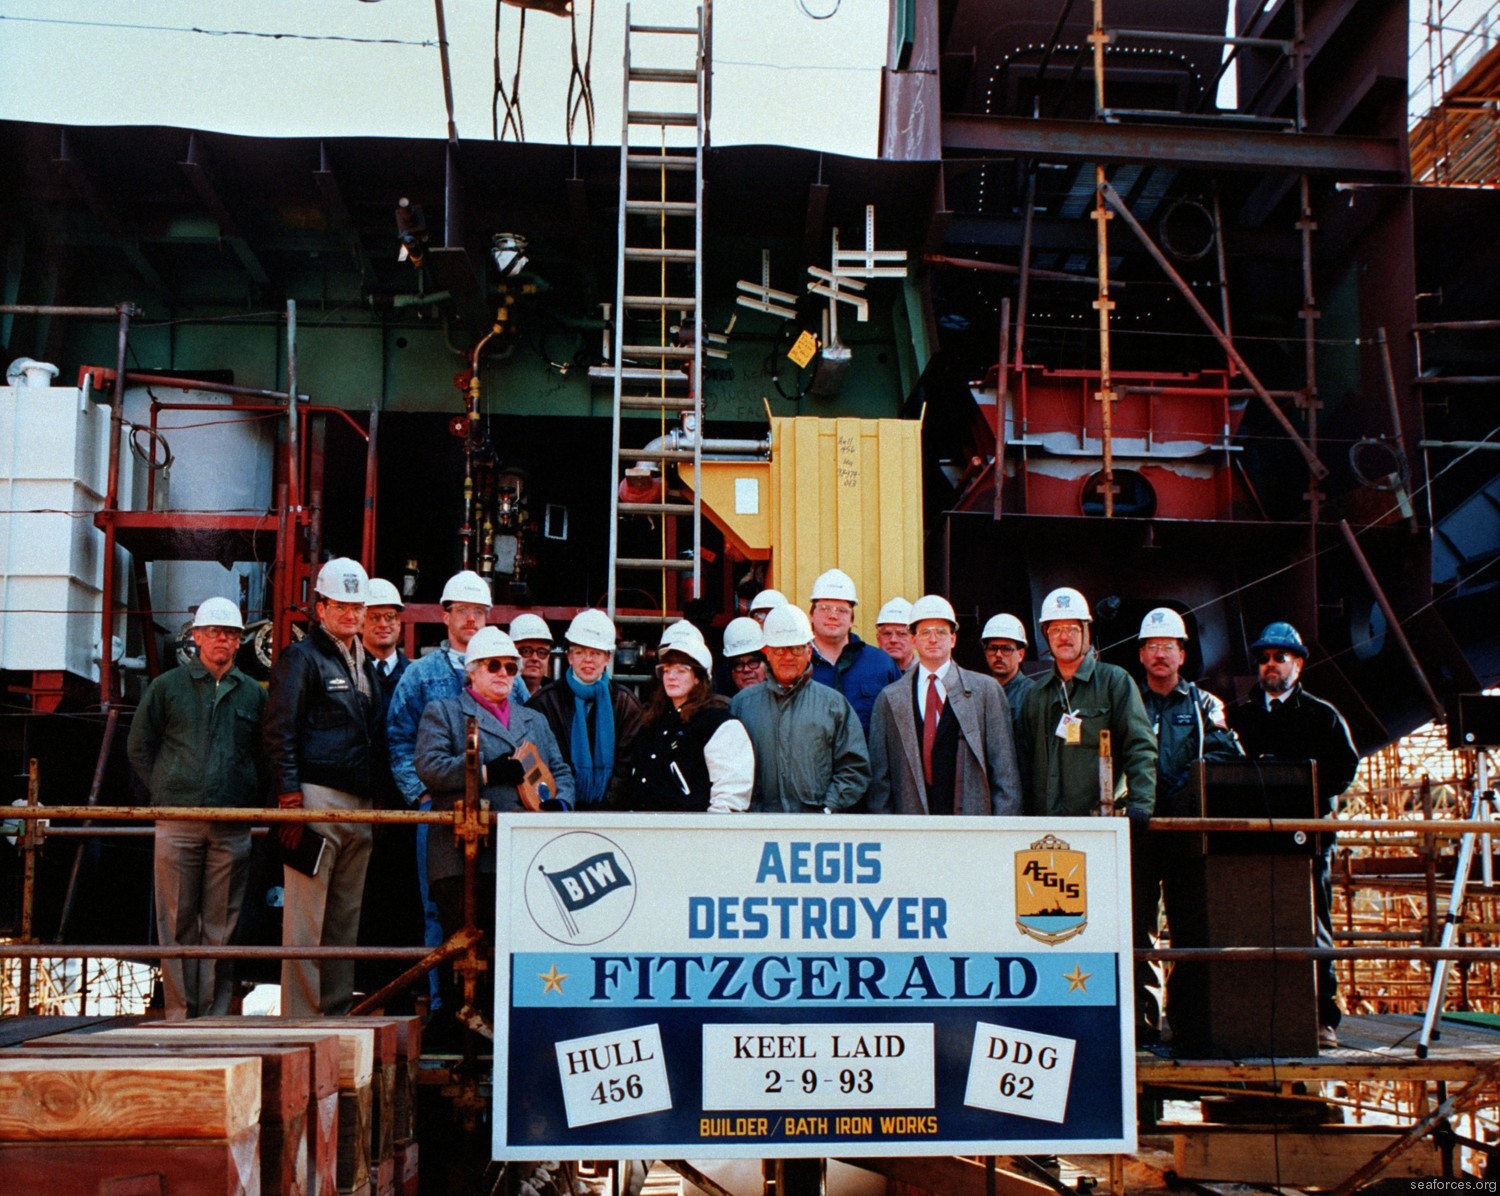 ddg-62 uss fitzgerald guided missile destroyer 1993 108 keel laying ceremony bath iron works maine